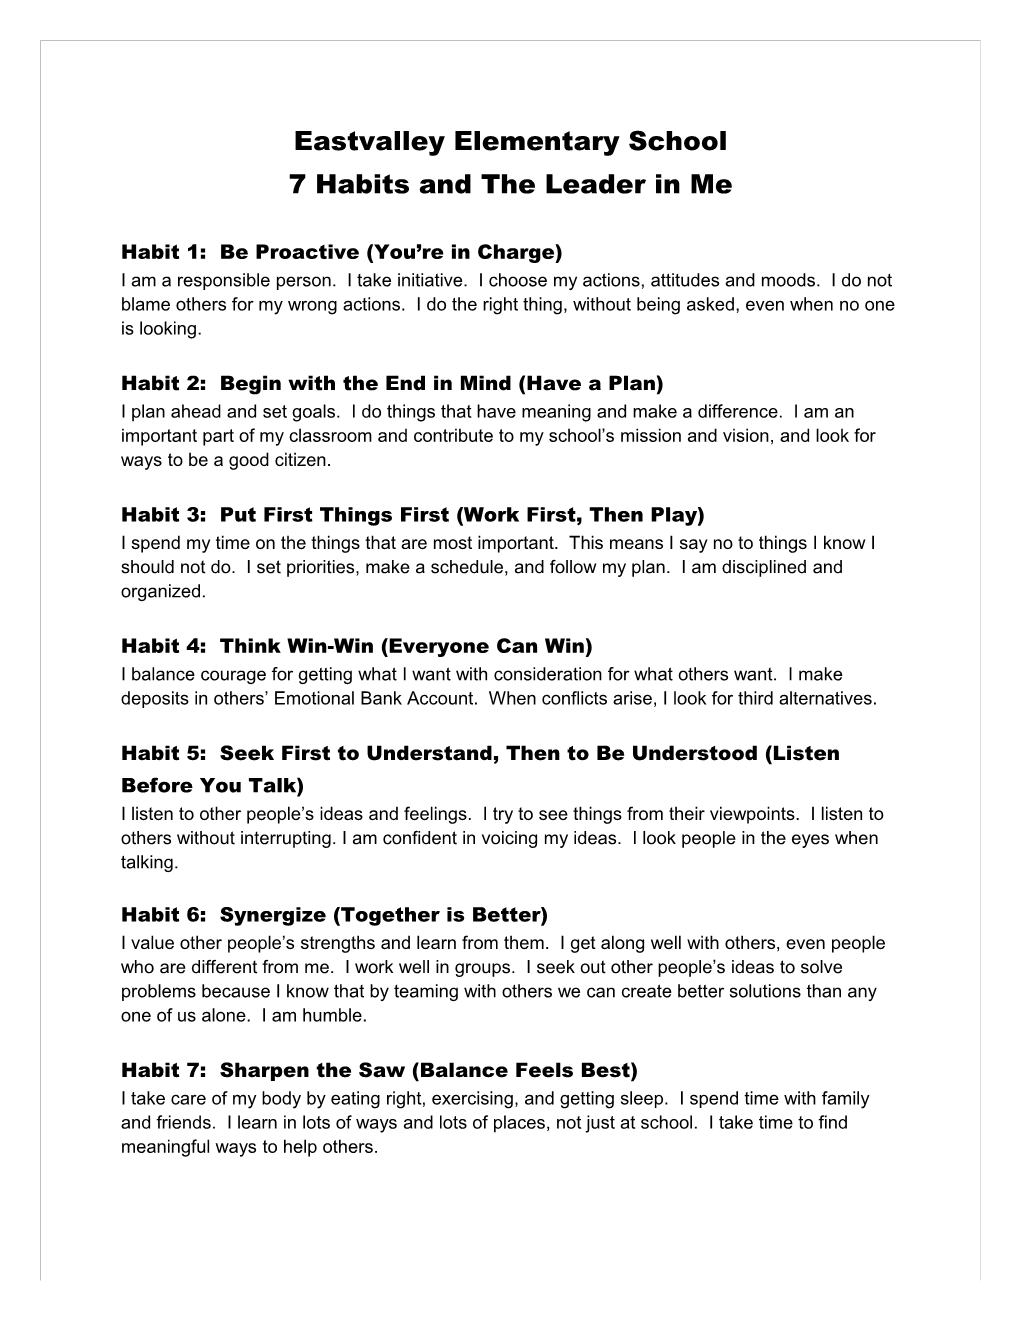 7 Habits and the Leader in Me